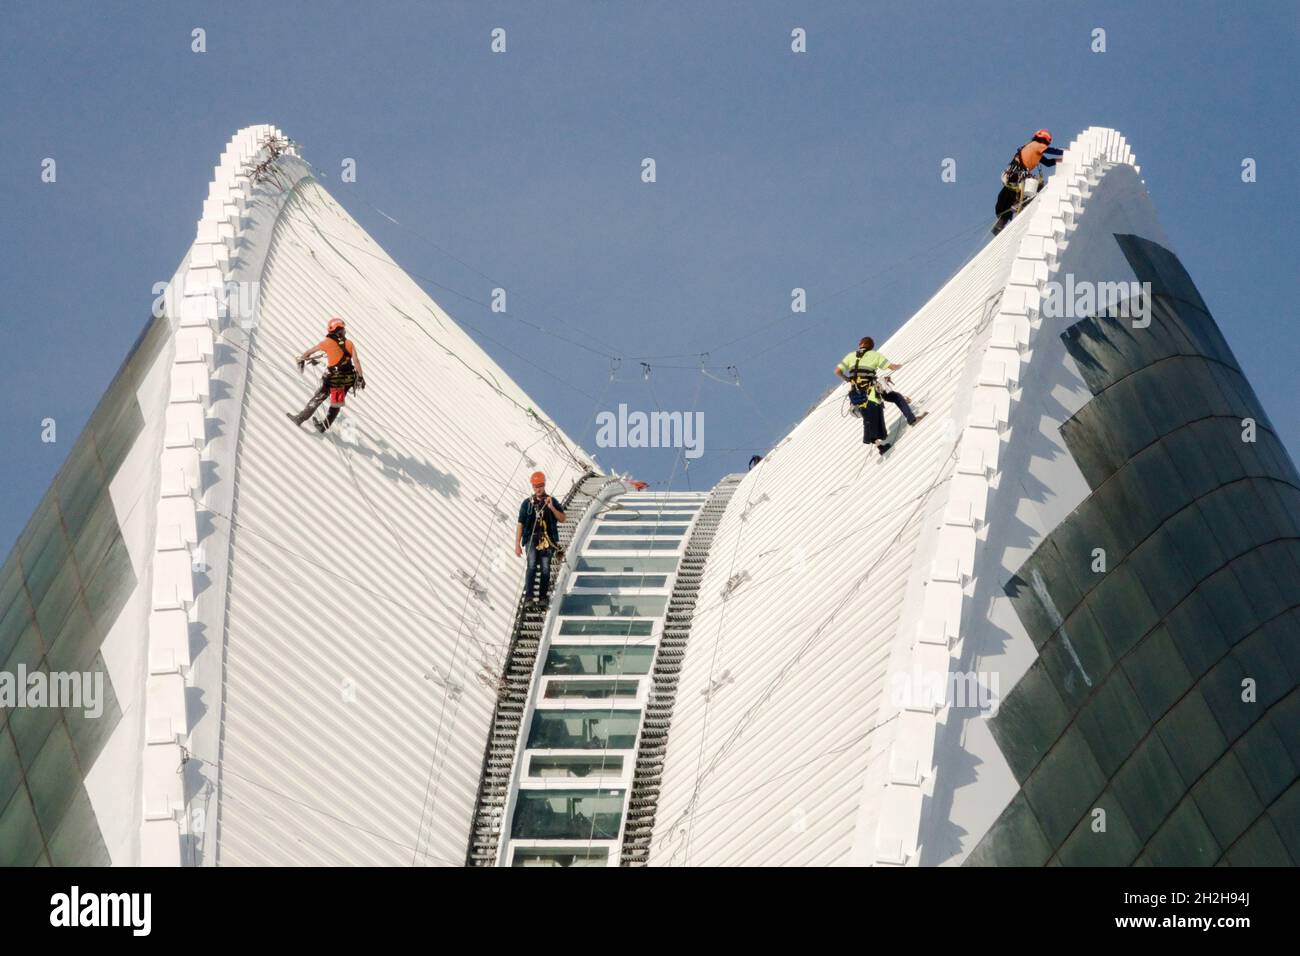 Group of workers, hanging on climbing rope controls modern building in Valencia Spain City of Arts and Sciences Stock Photo